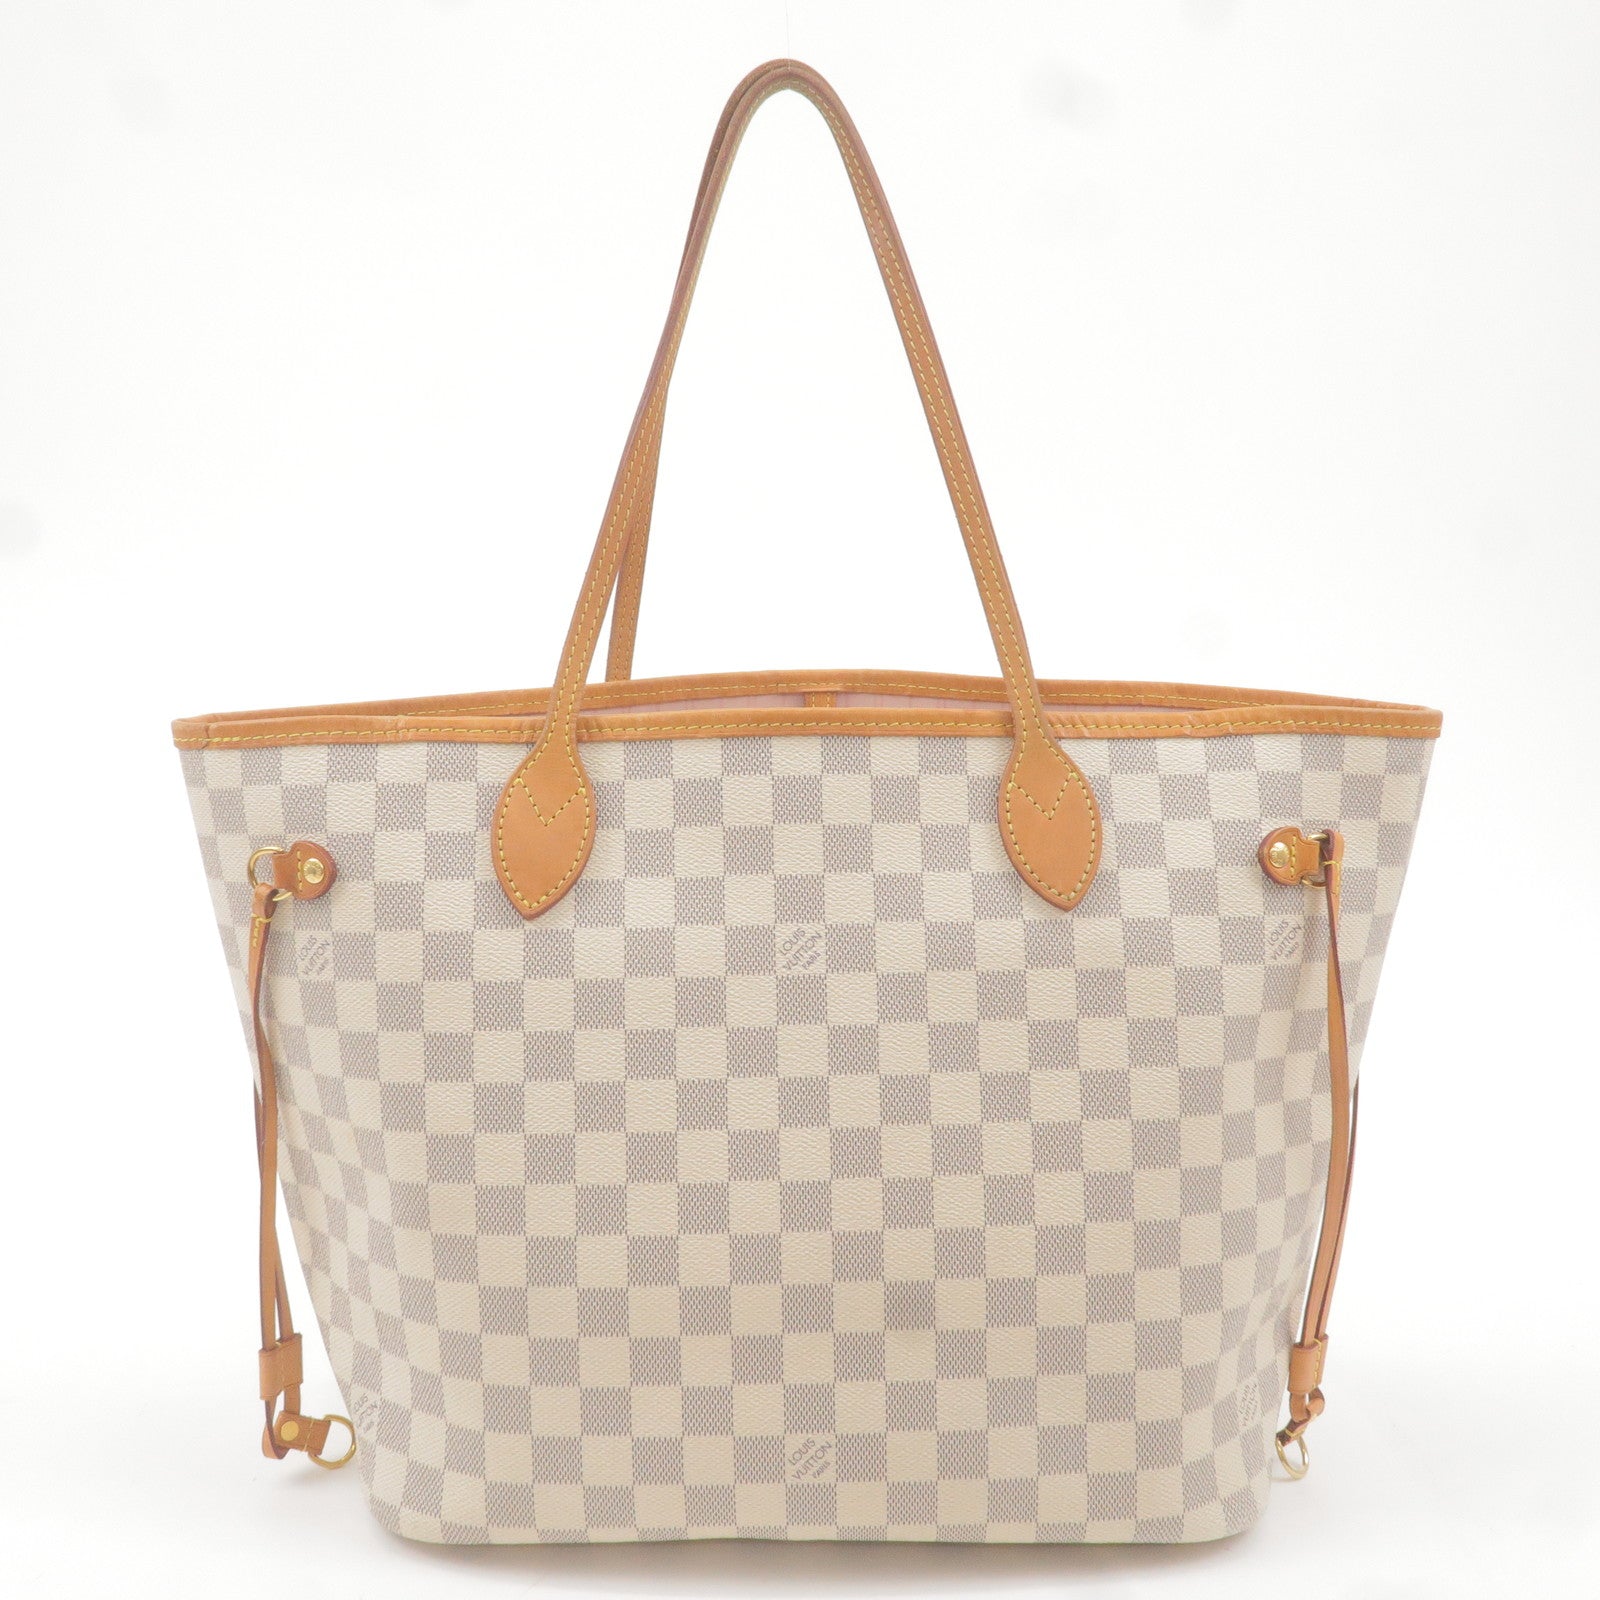 Louis Vuitton Neverfull Rose Interior Painted